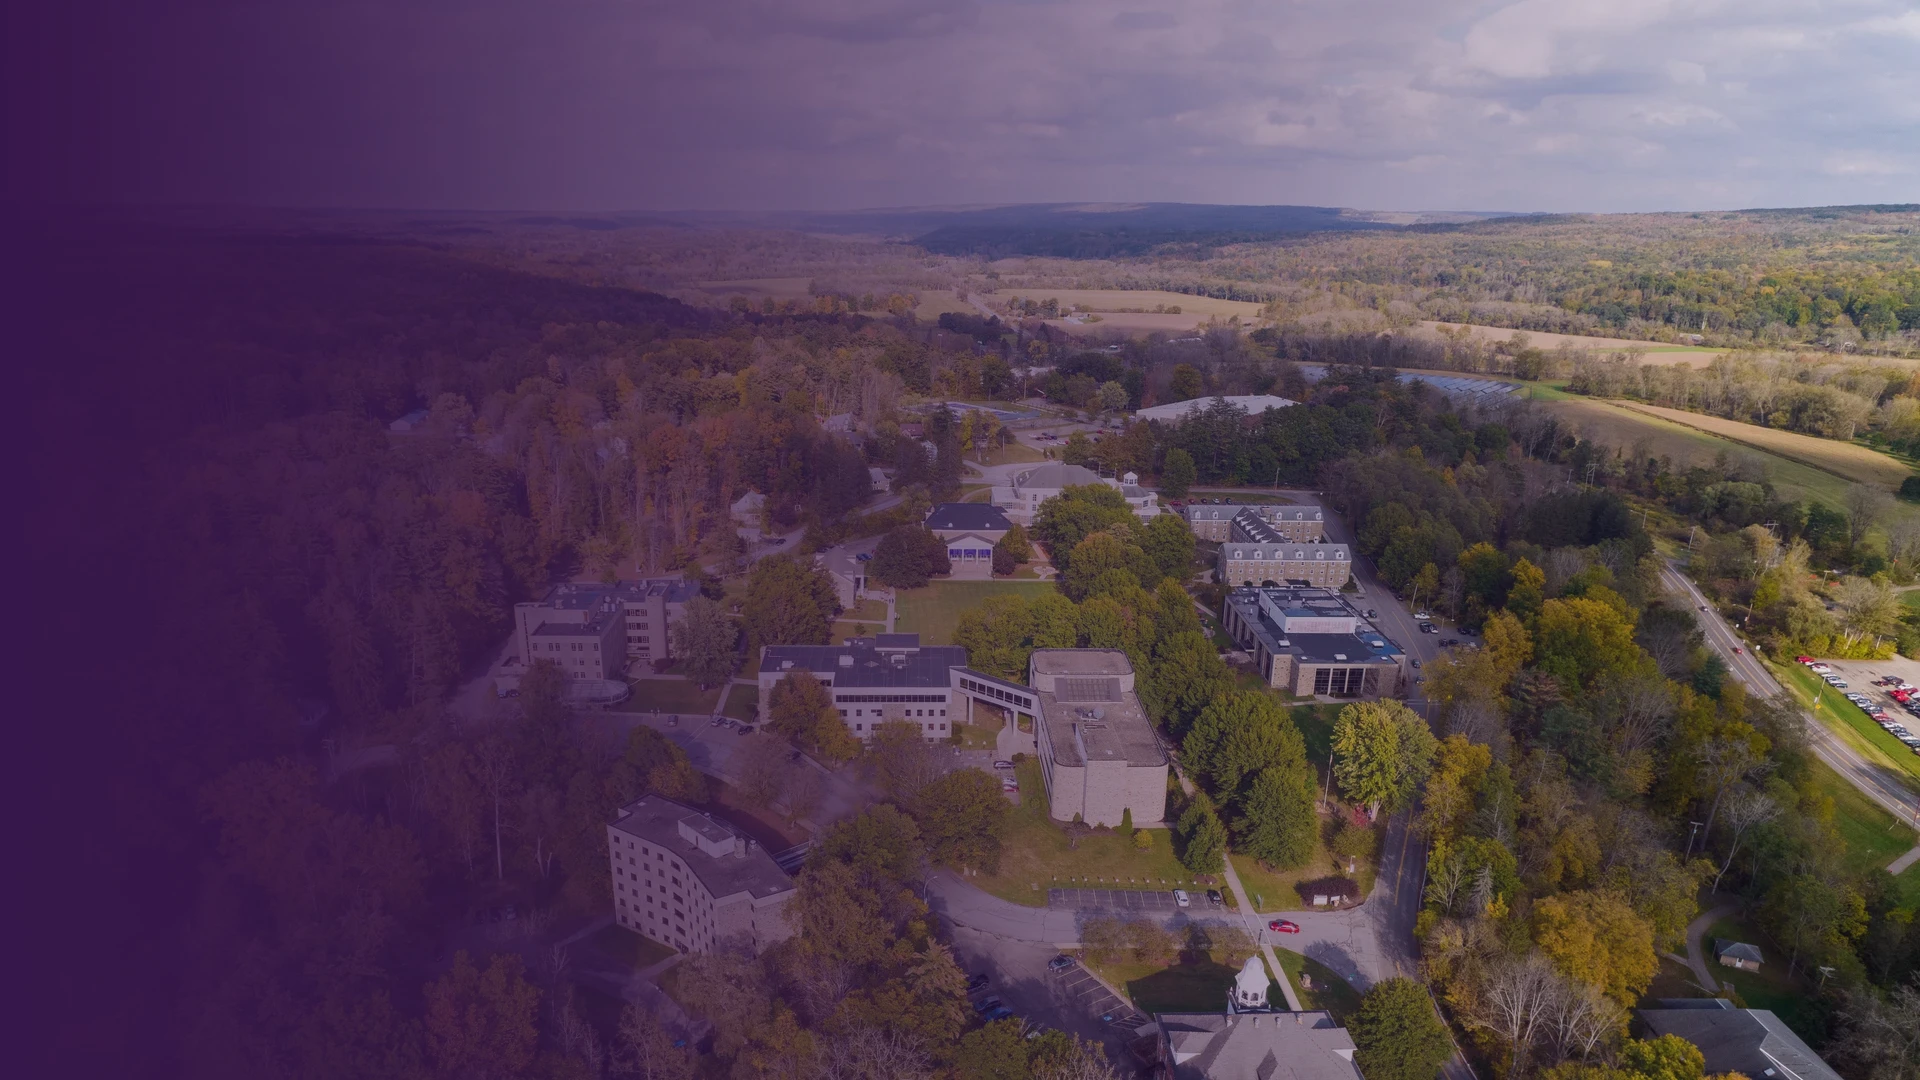 Aerial view of Houghton University's campus in the Genesee Valley.